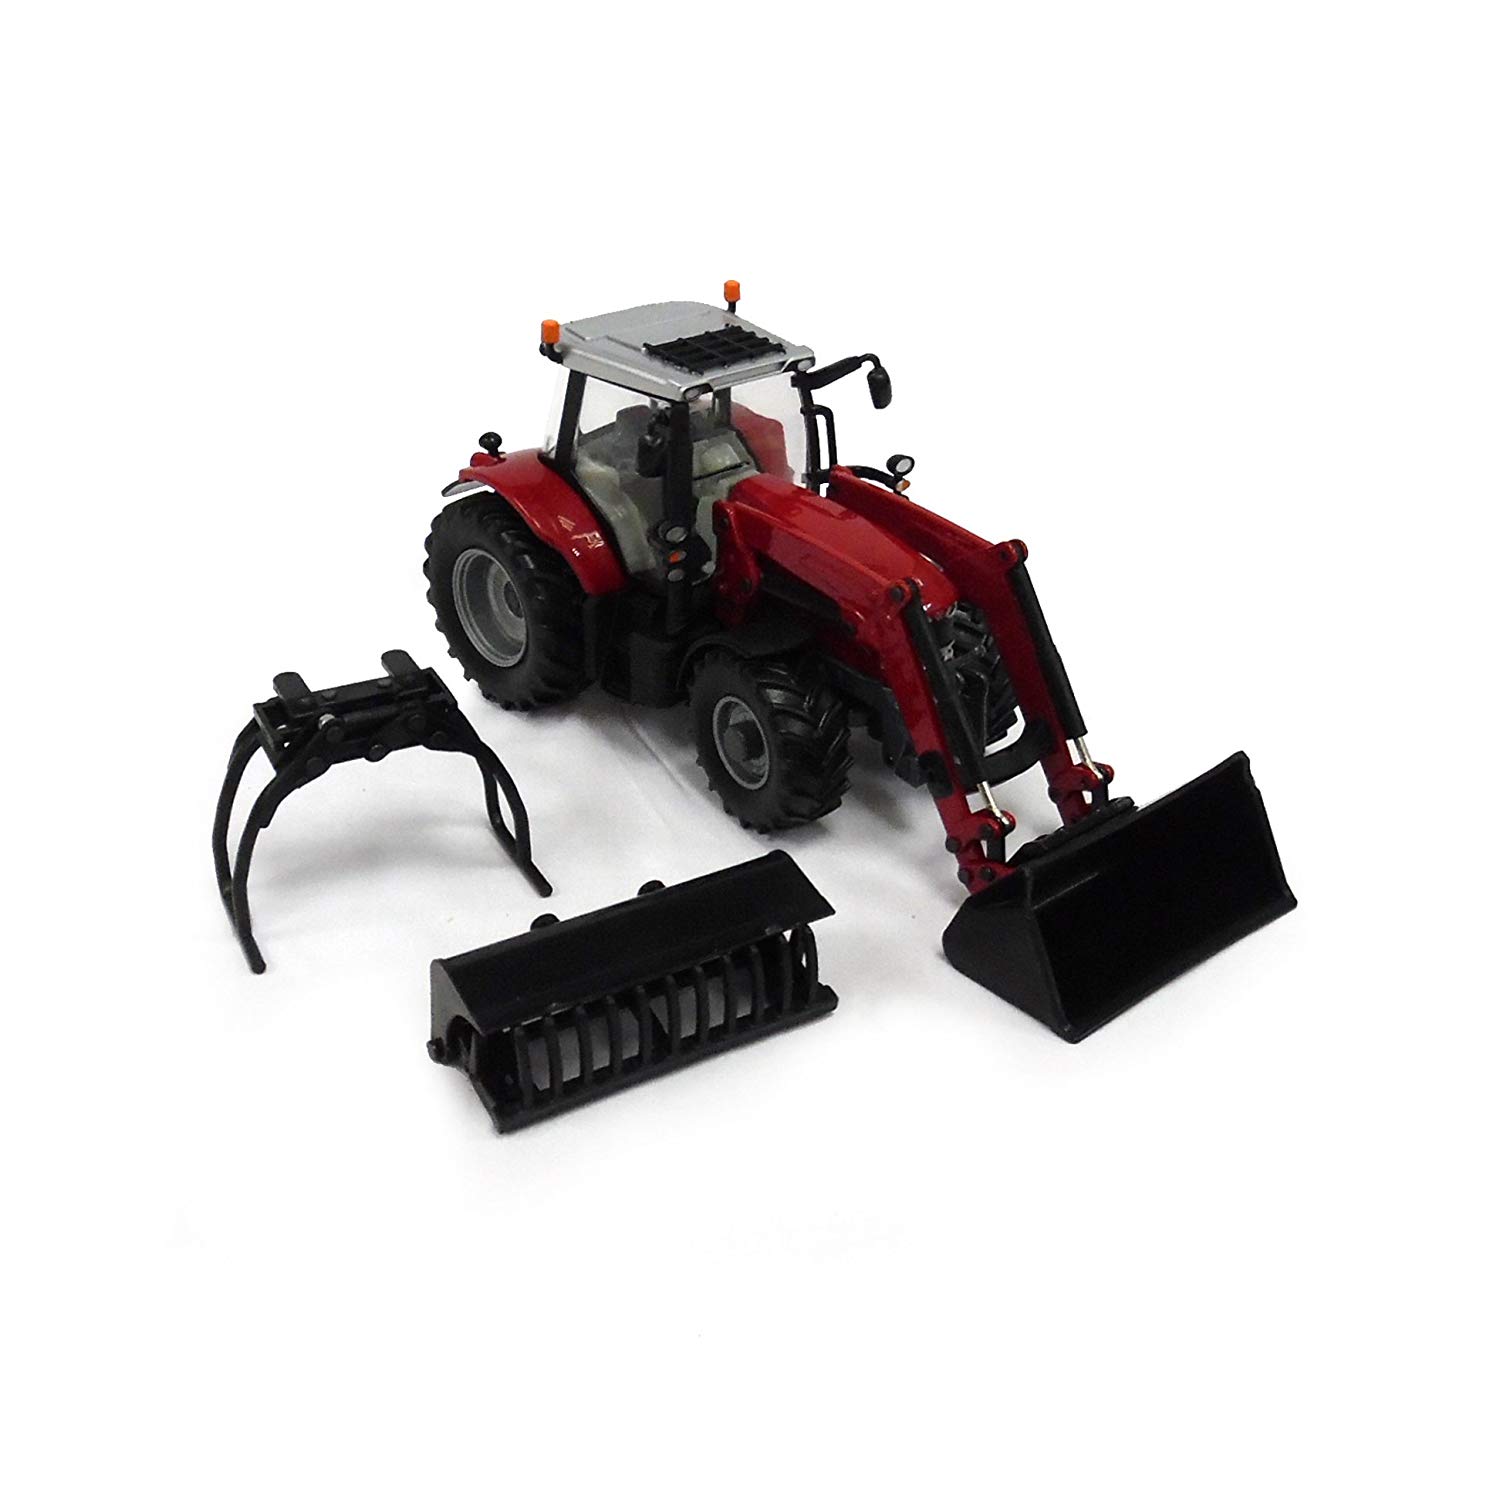 Britains BRITAINS BRI 43082A1 MASSEY FERGUSSON 6616 TRACTOR WITH LOADER TRACTOR 